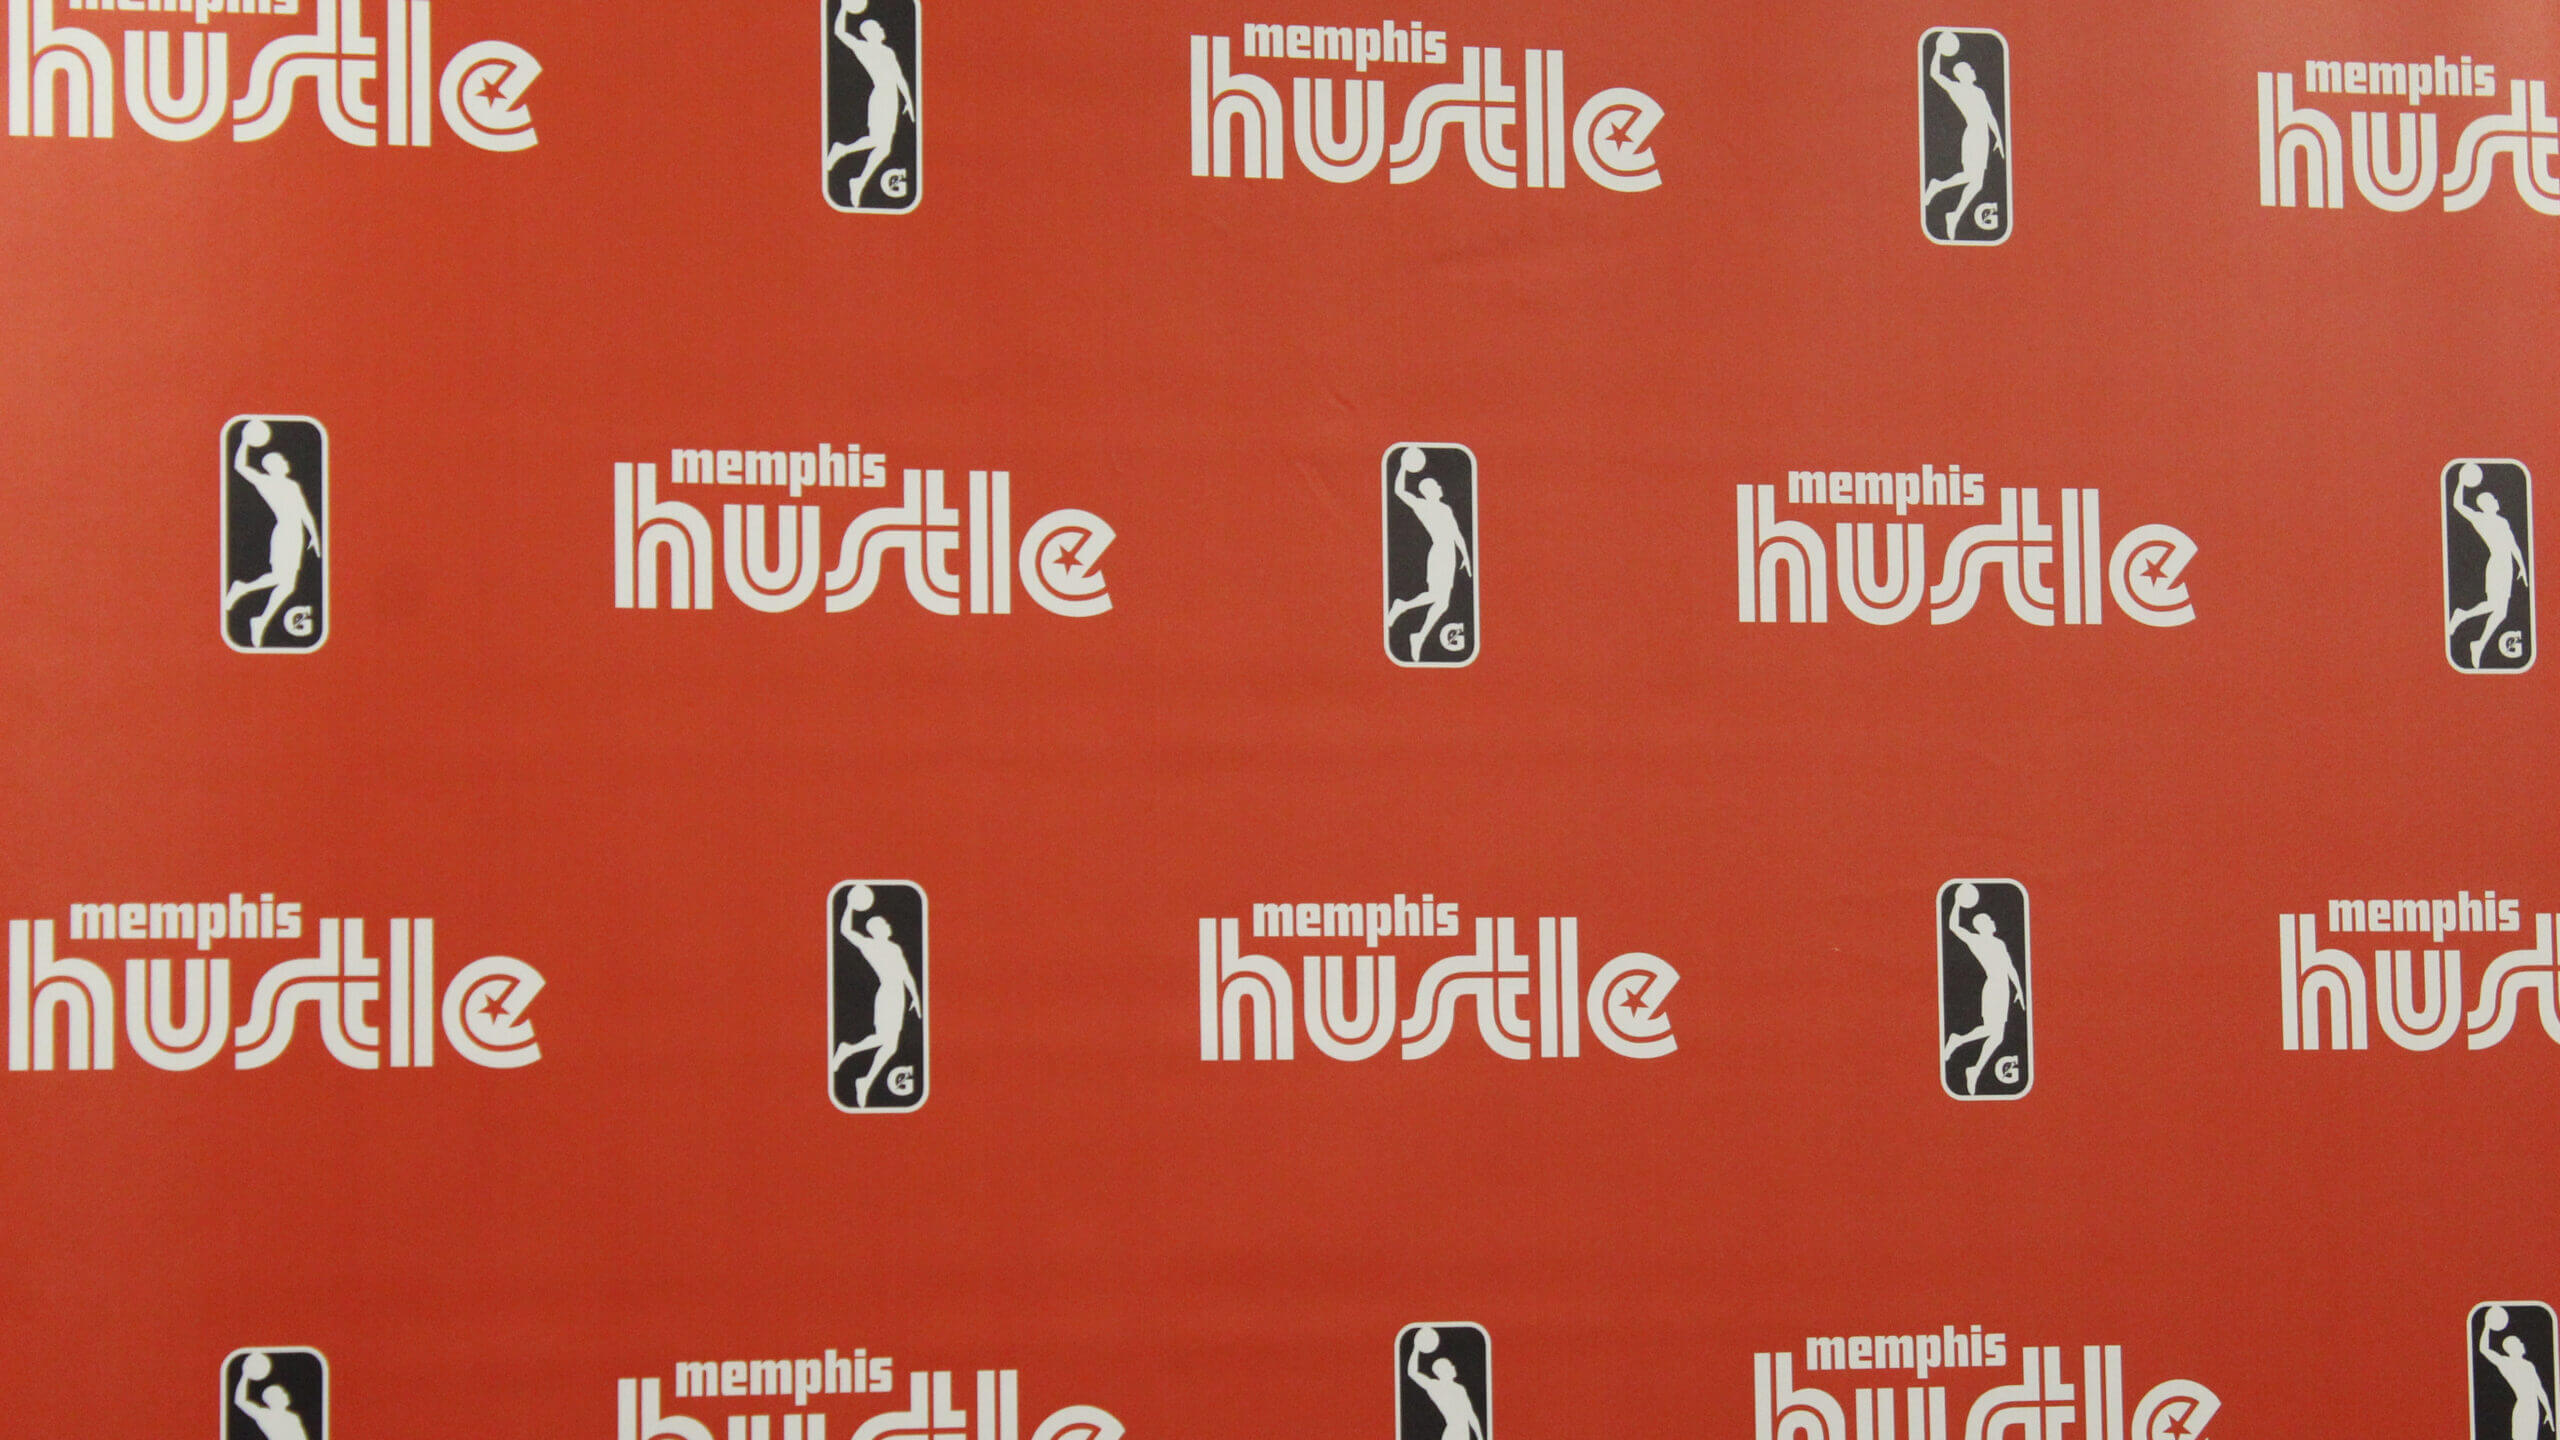 Hustle acquire returning player rights to Tremont Waters